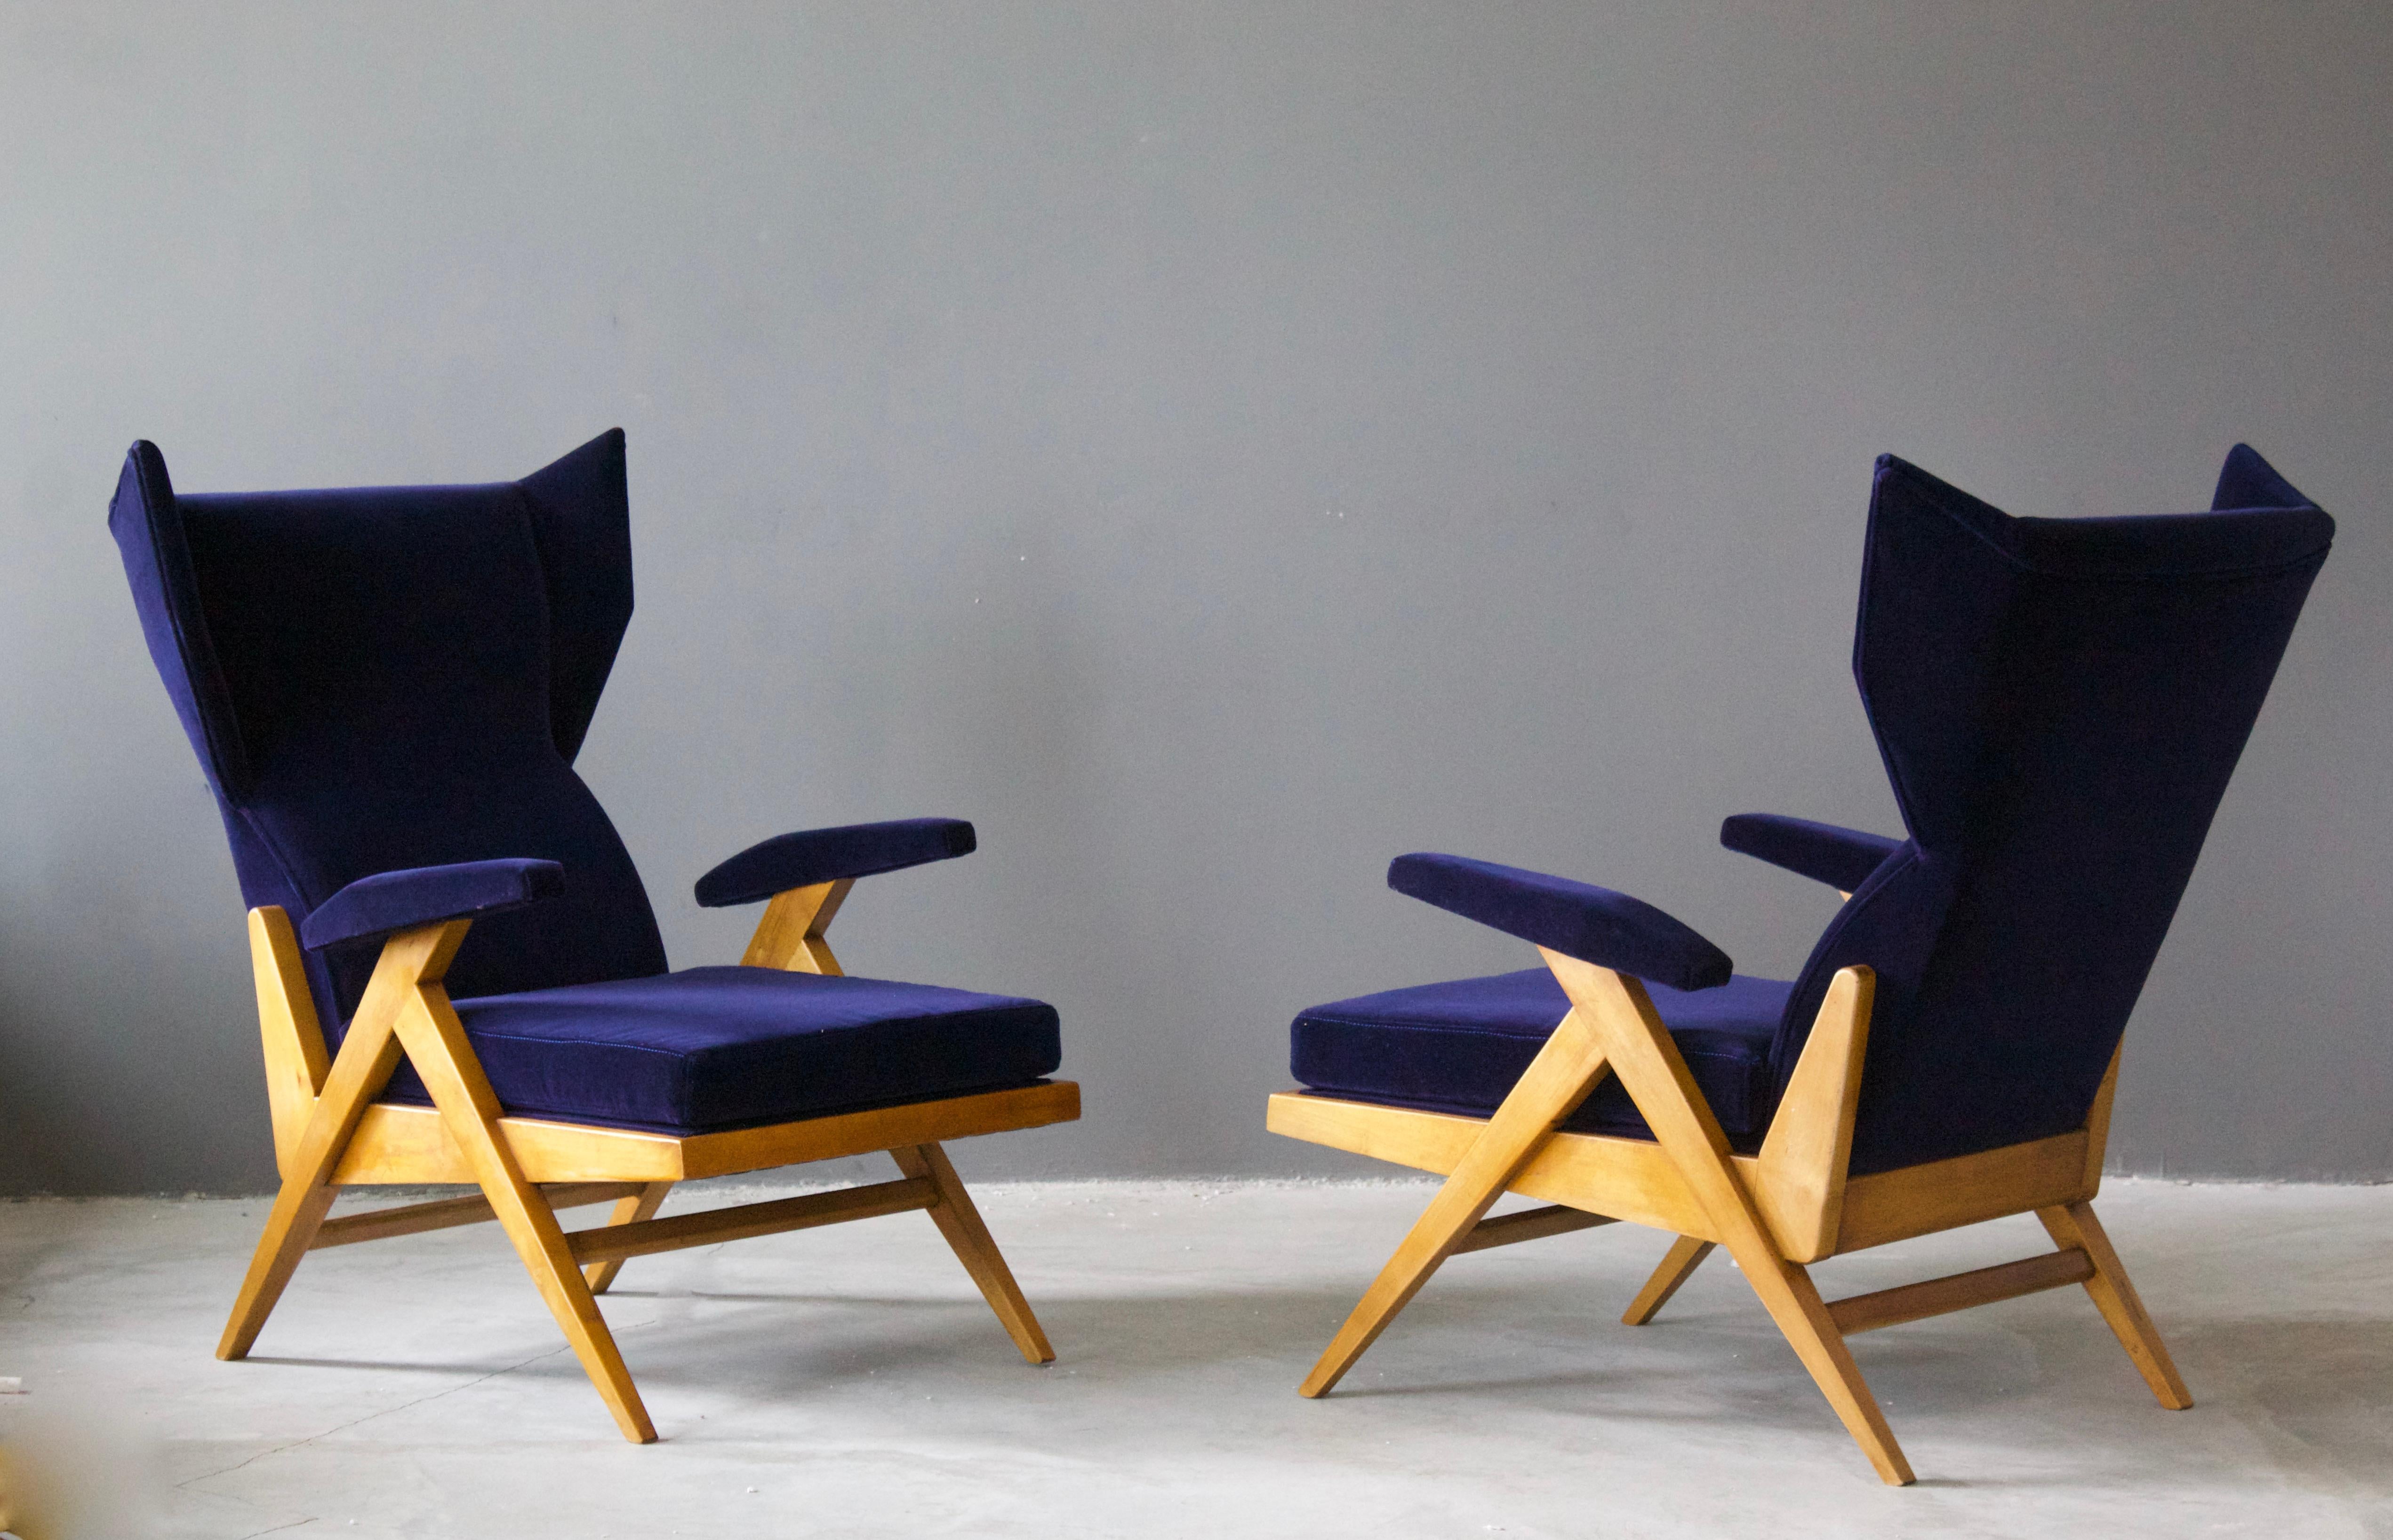 A pair of highly modernist lounge chairs. Designed by Renzo Franchi, Italy, 1950s. Restored and reupholstered in a brand new blue velvet fabric in recent time.

Other designers of the period include Ico Parisi, Gio Ponti, Franco Albini, Vladimir